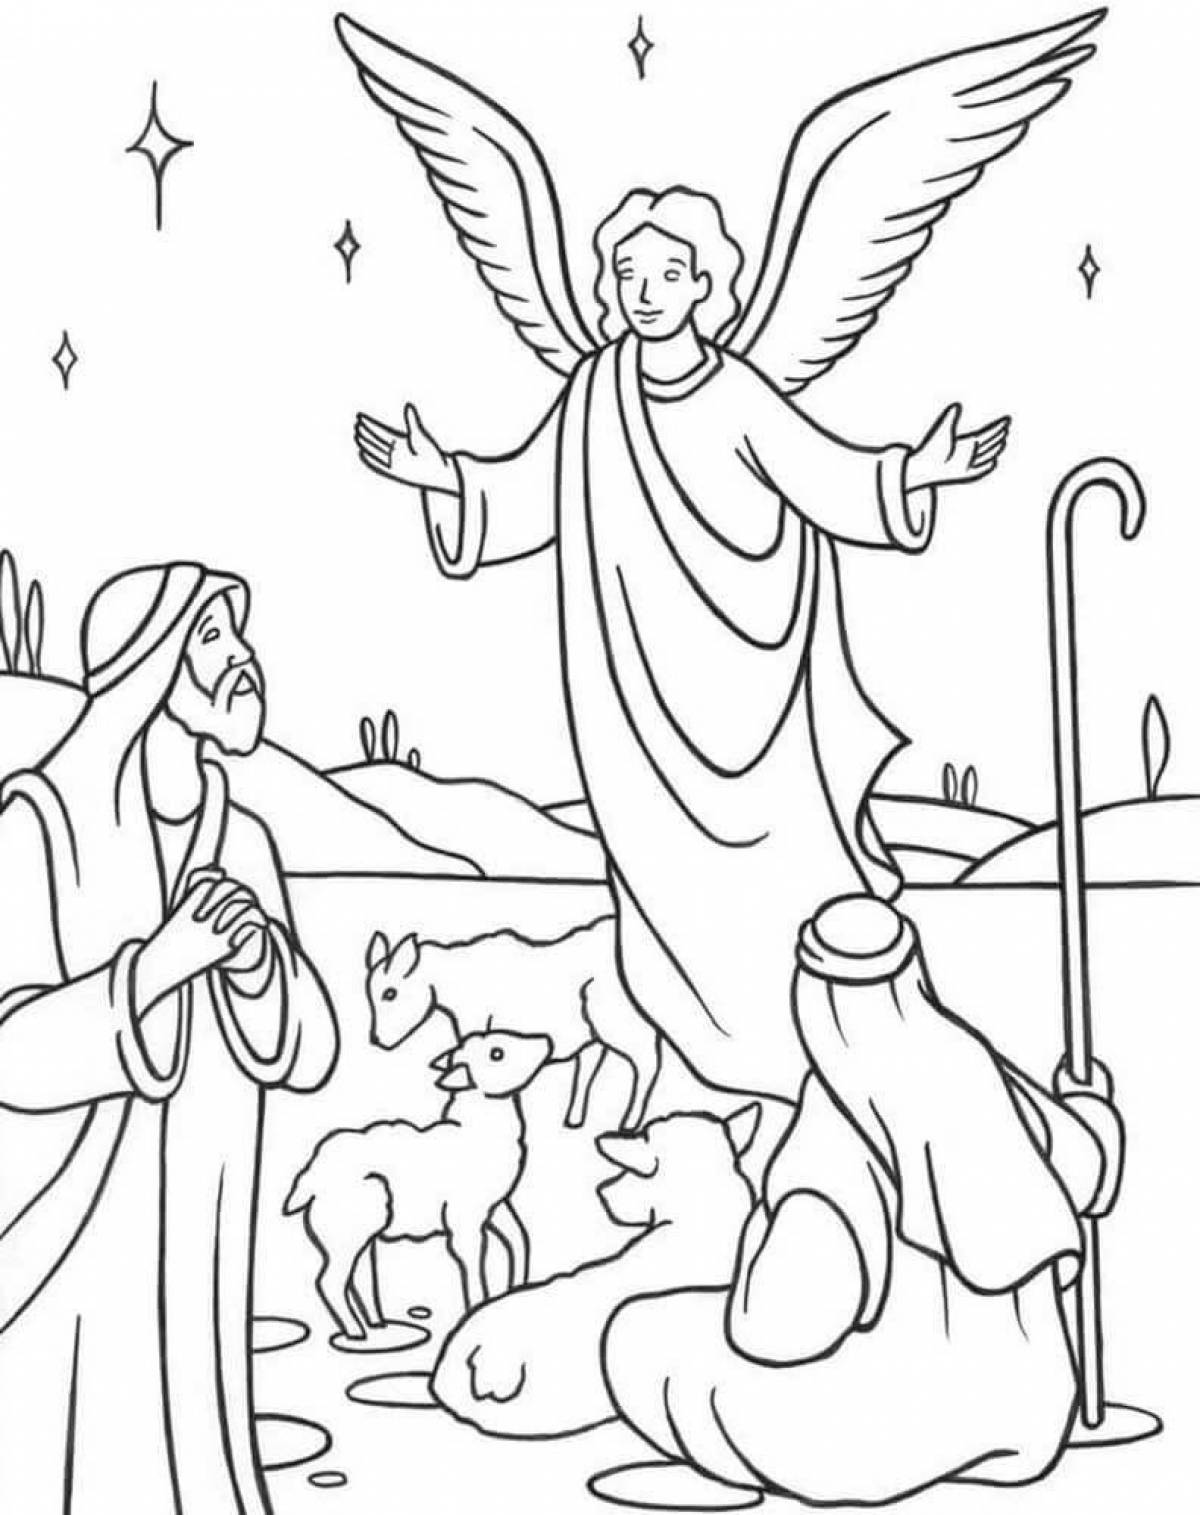 Exciting Shepherd Christmas Coloring Pages